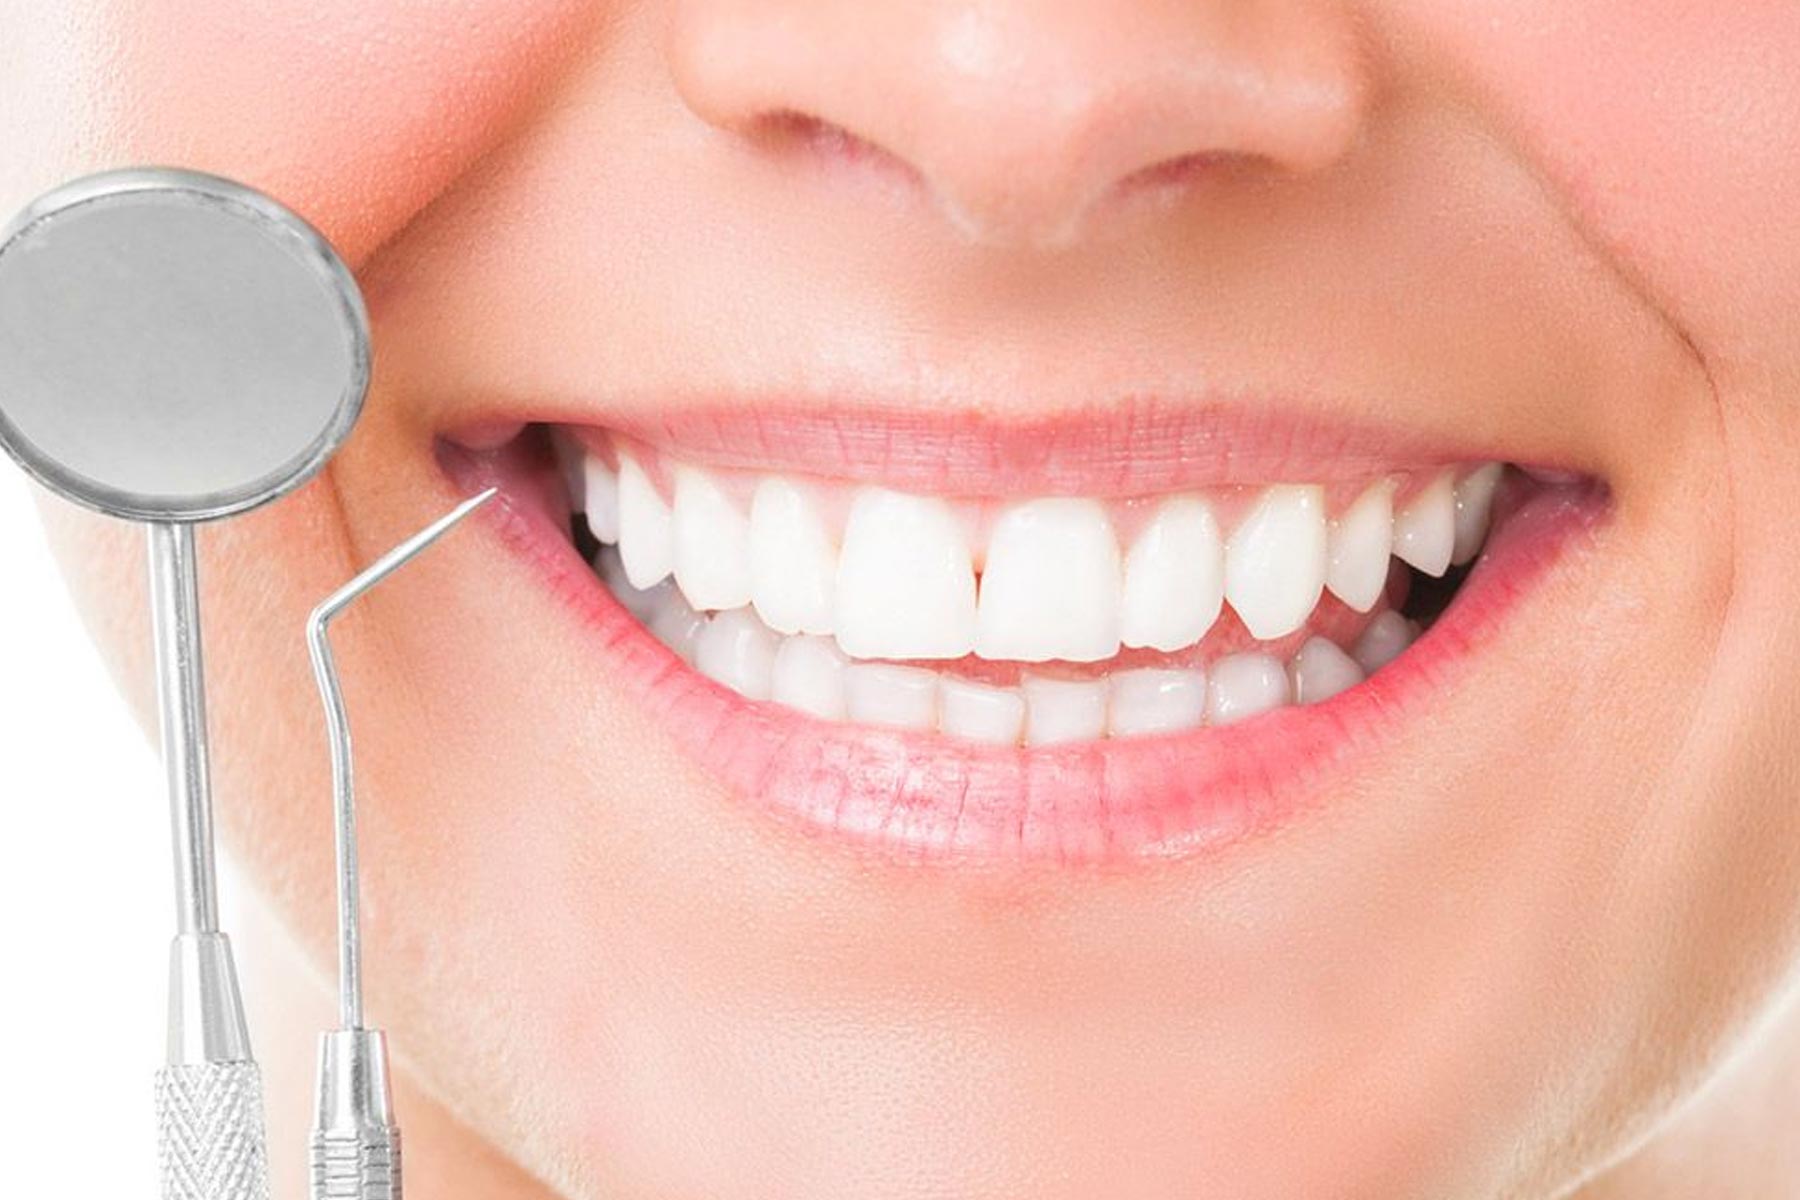 Close up picture of smiling mouth with oral hygiene instruments used by dentist